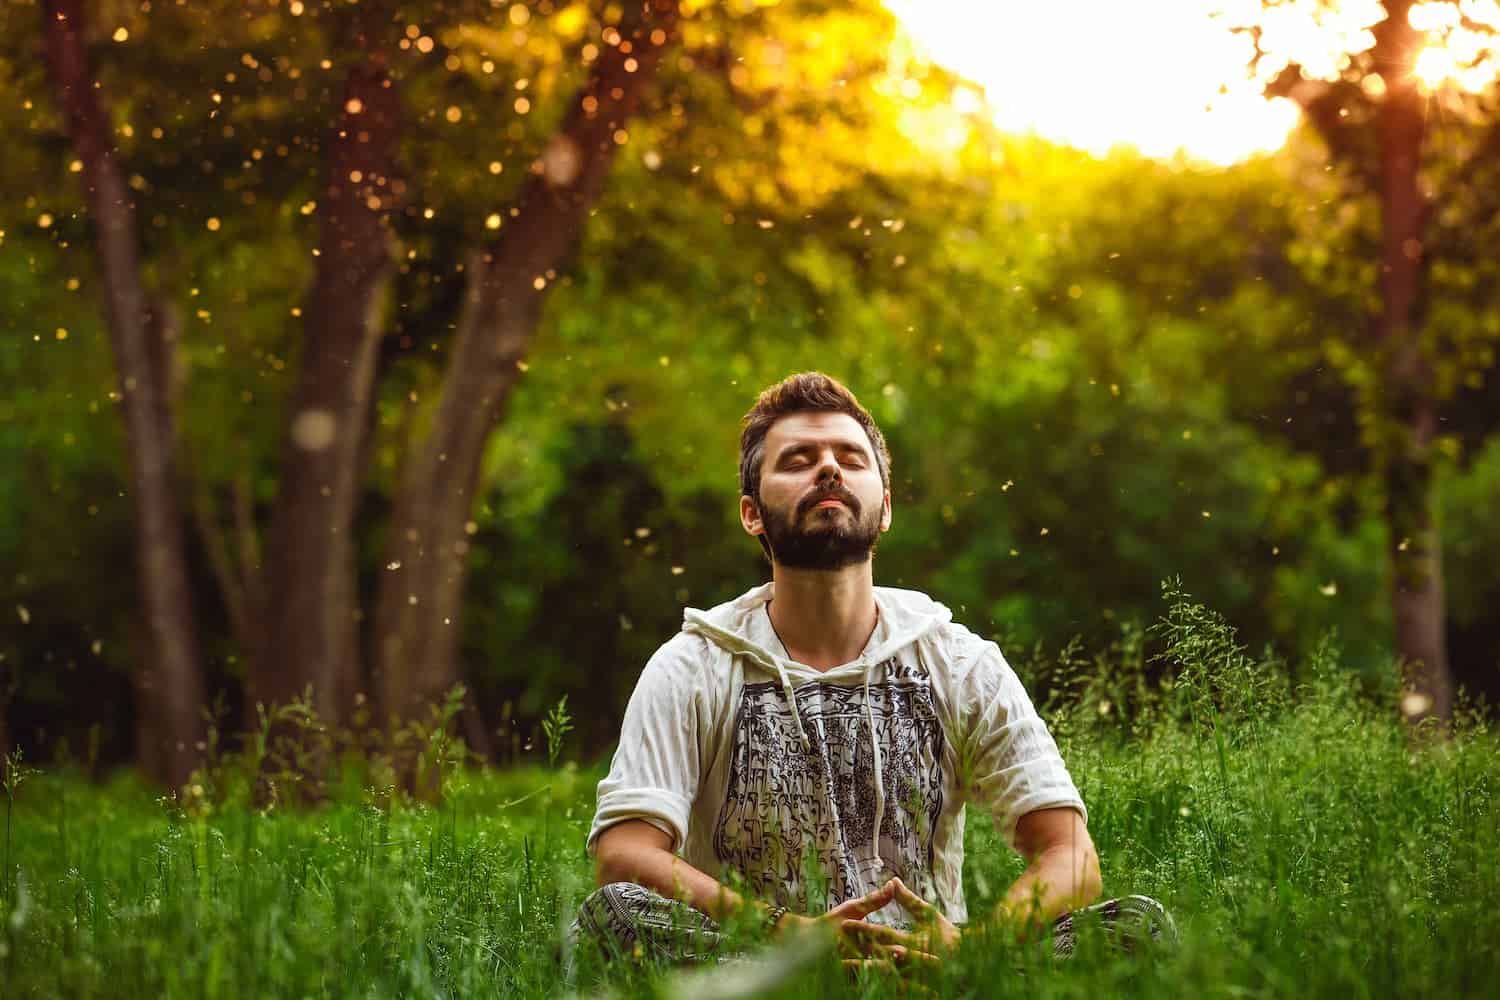 Man enjoying life and nature in a new light thanks to ketamine assisted psychotherapy 